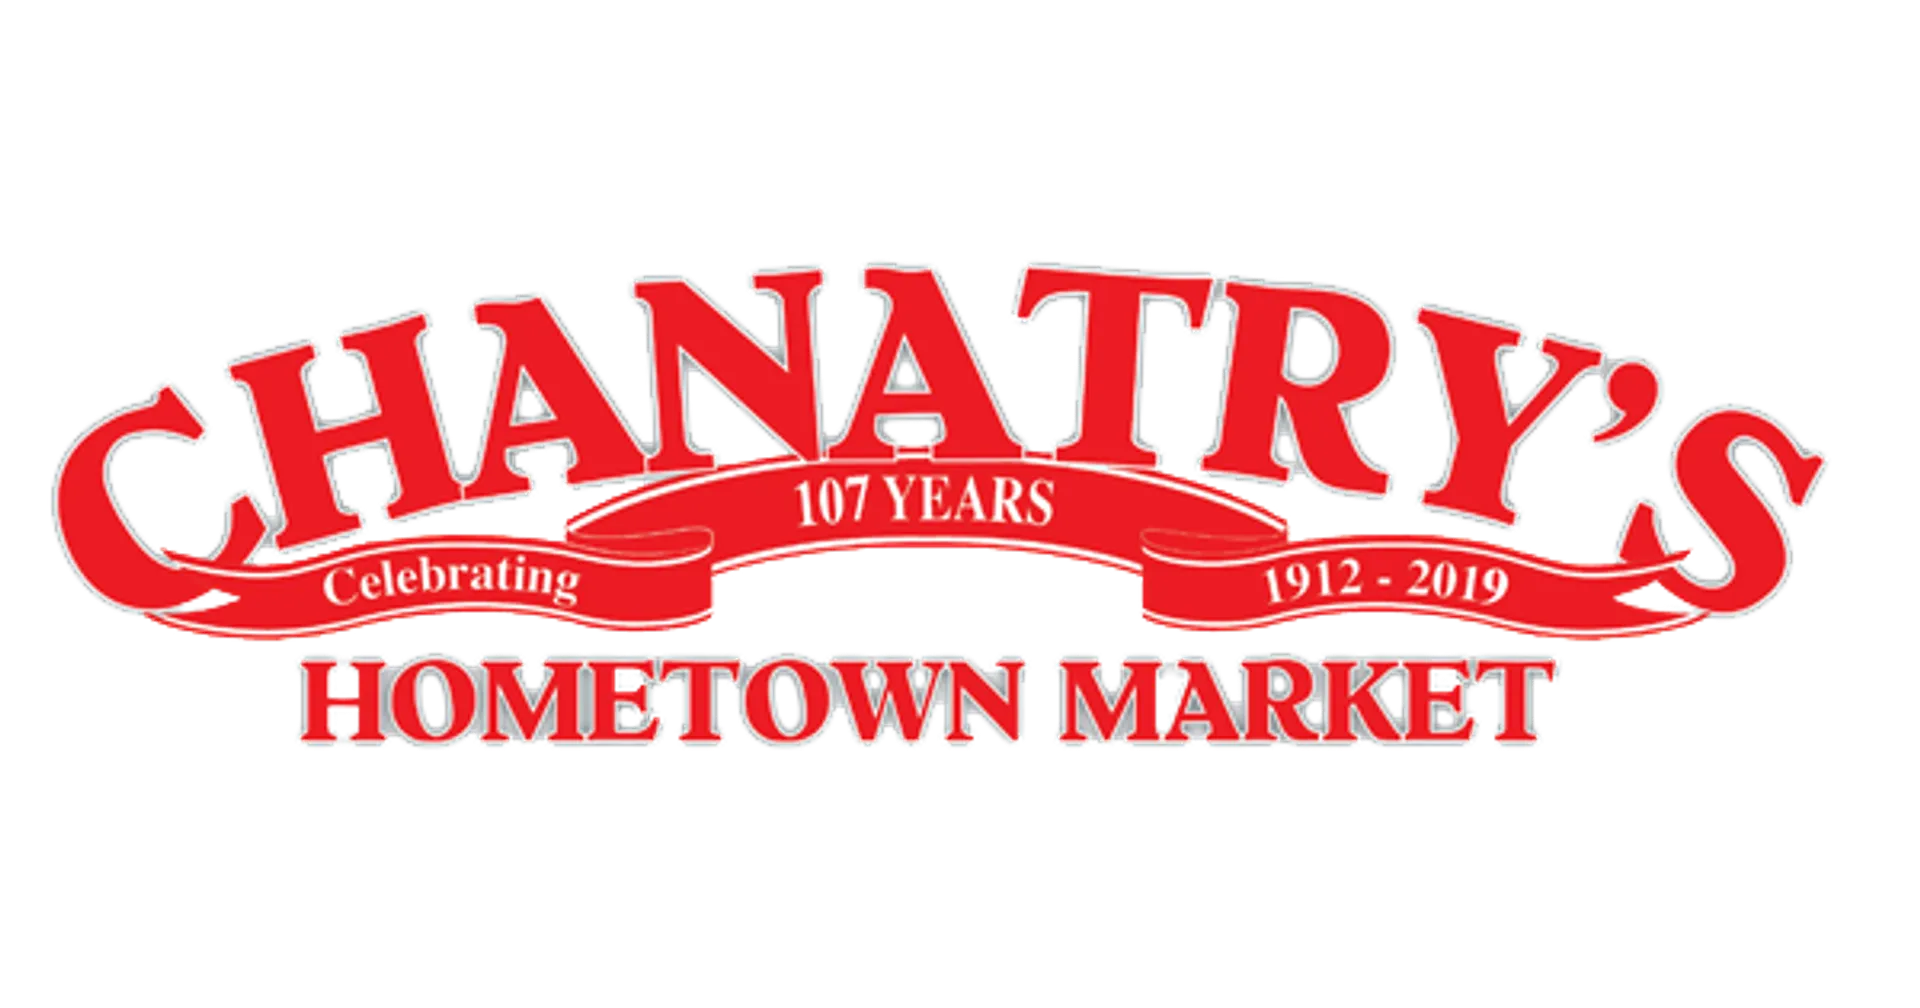 CHANATRY'S HOMETOWN MARKET logo current weekly ad